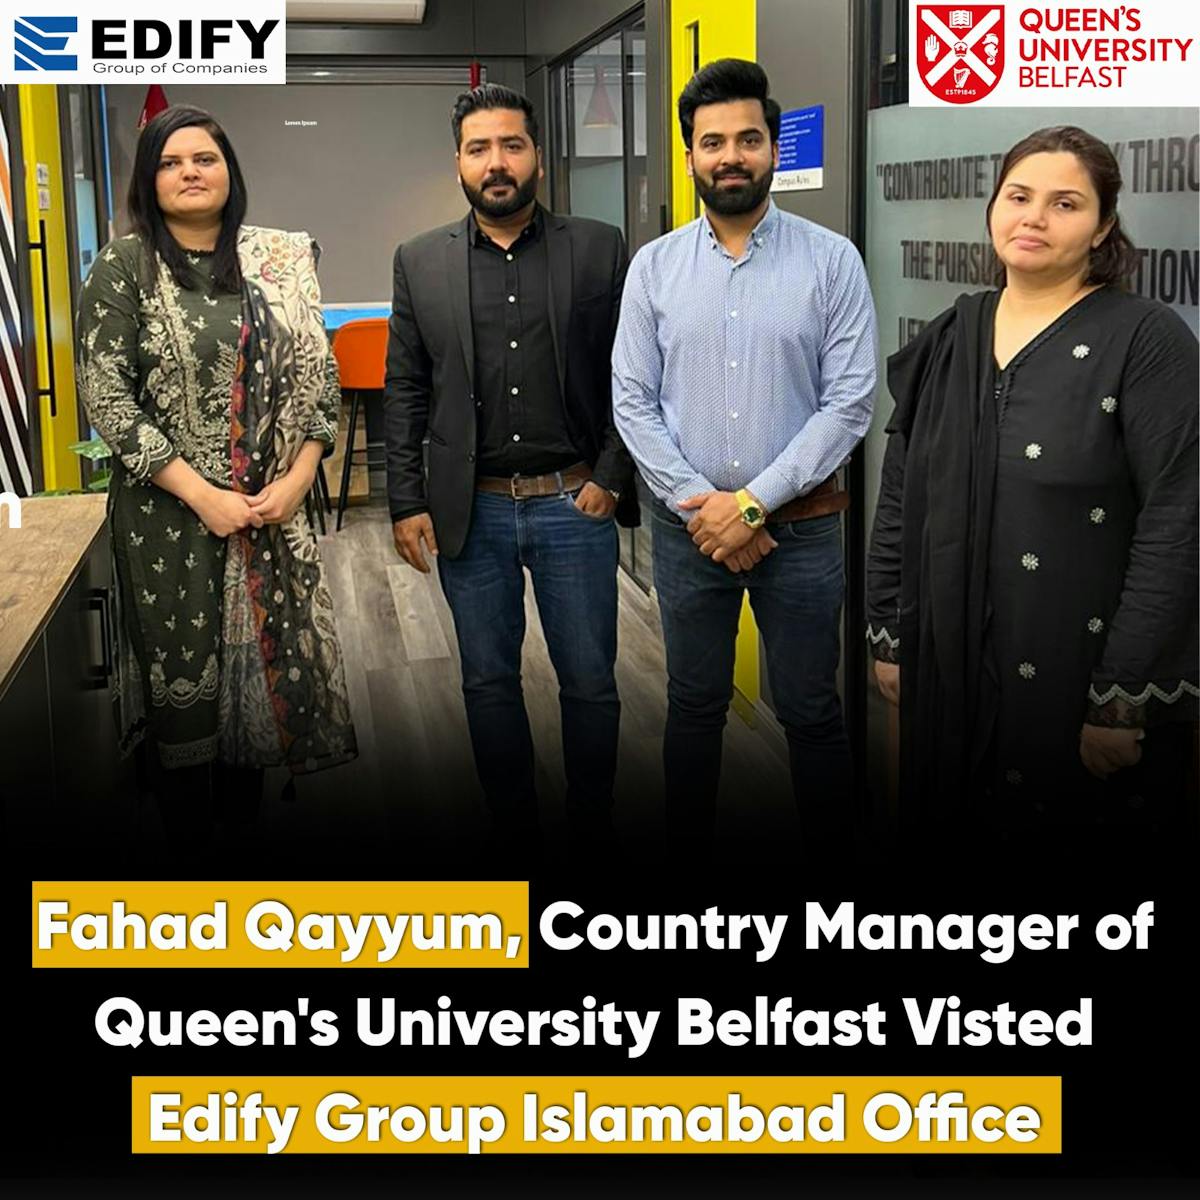 Exciting collaboration alert! 🎉 Fahad Qayyum, Country Manager of Queen's University Belfast, paid a visit to the Edify Group Islamabad office. Our team had an insightful discussion on fostering academic partnerships and enhancing educational opportunities for students. Stay tuned for updates on this promising collaboration! 🌟